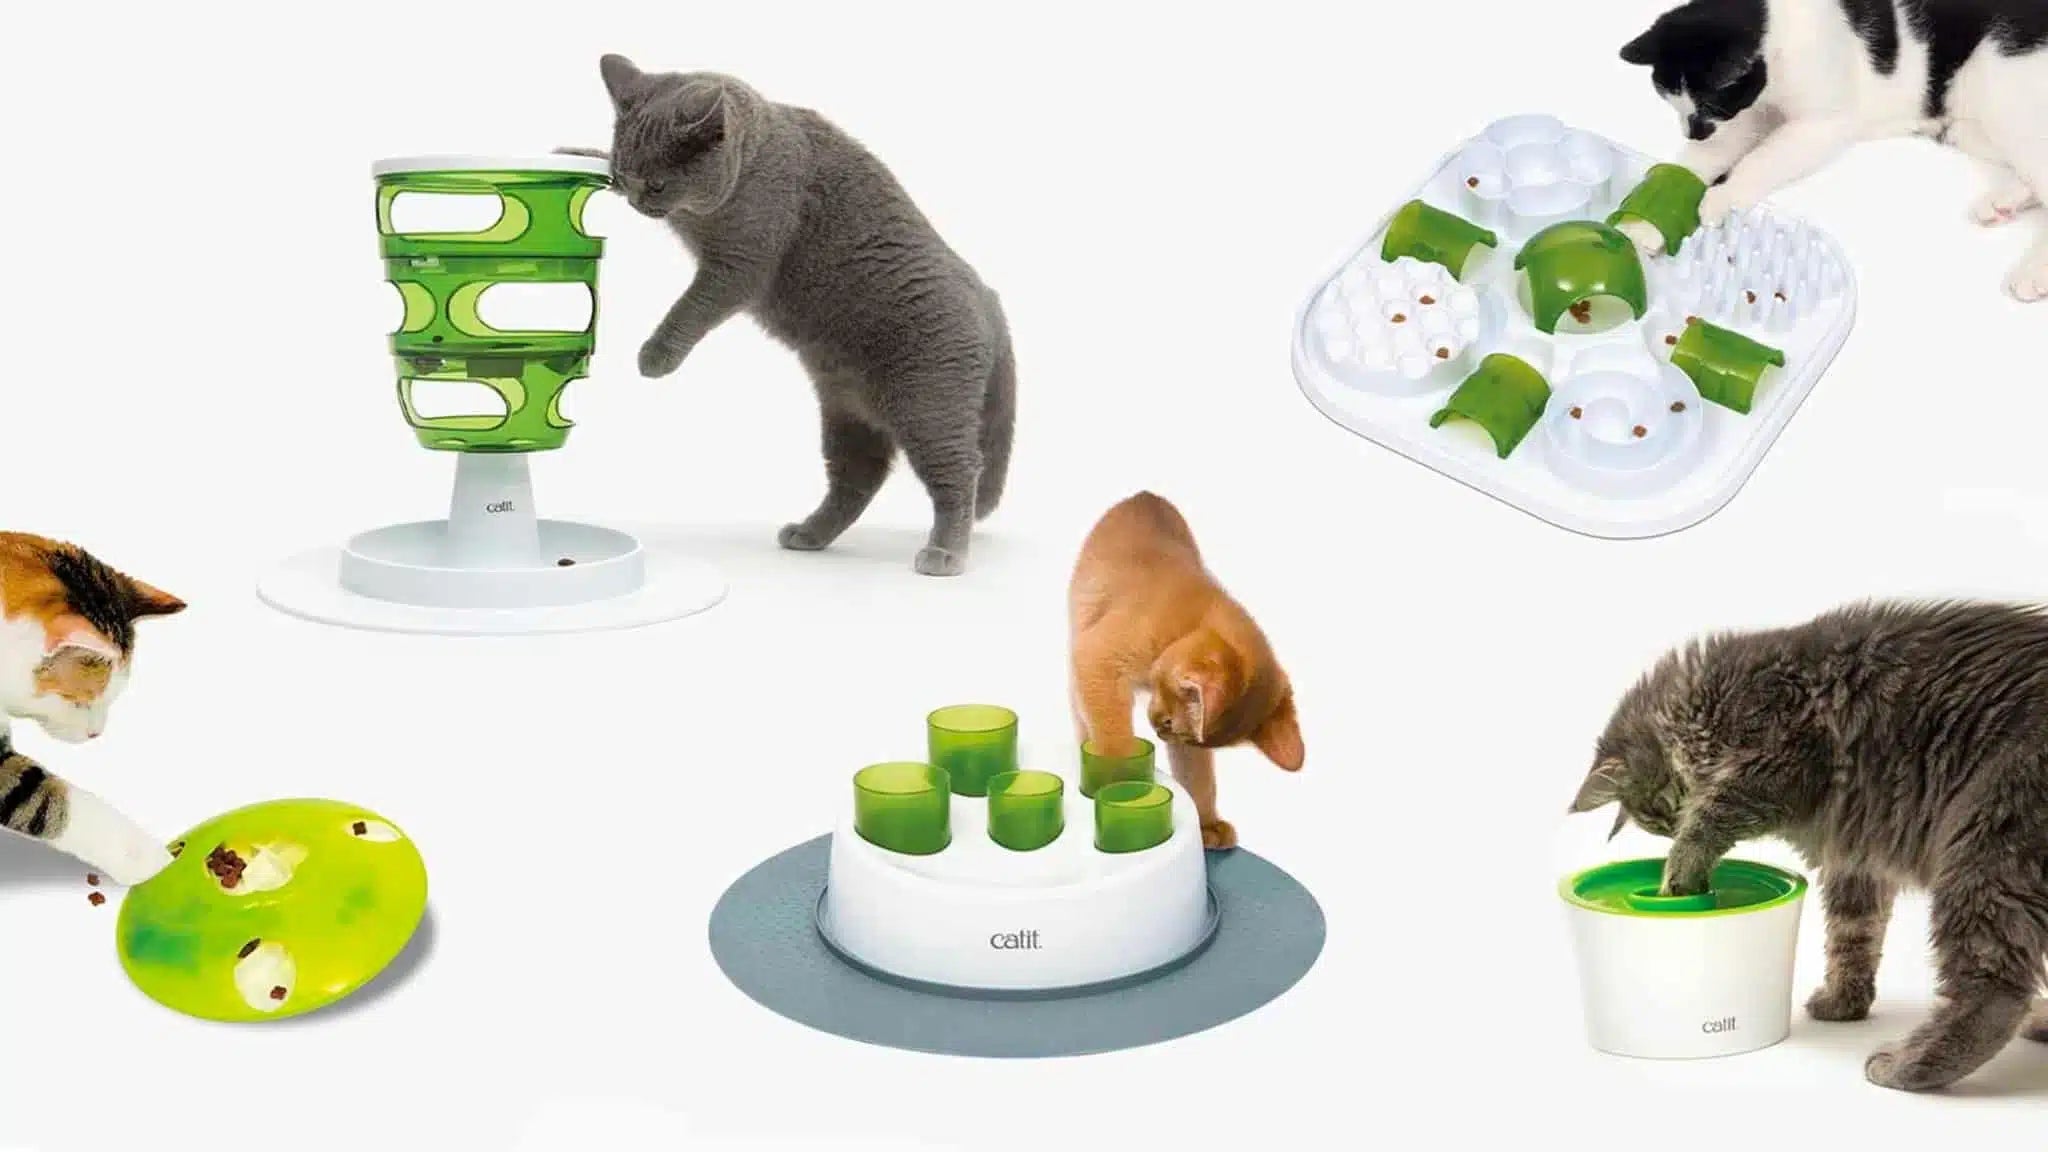 Puzzle feeders for your cat